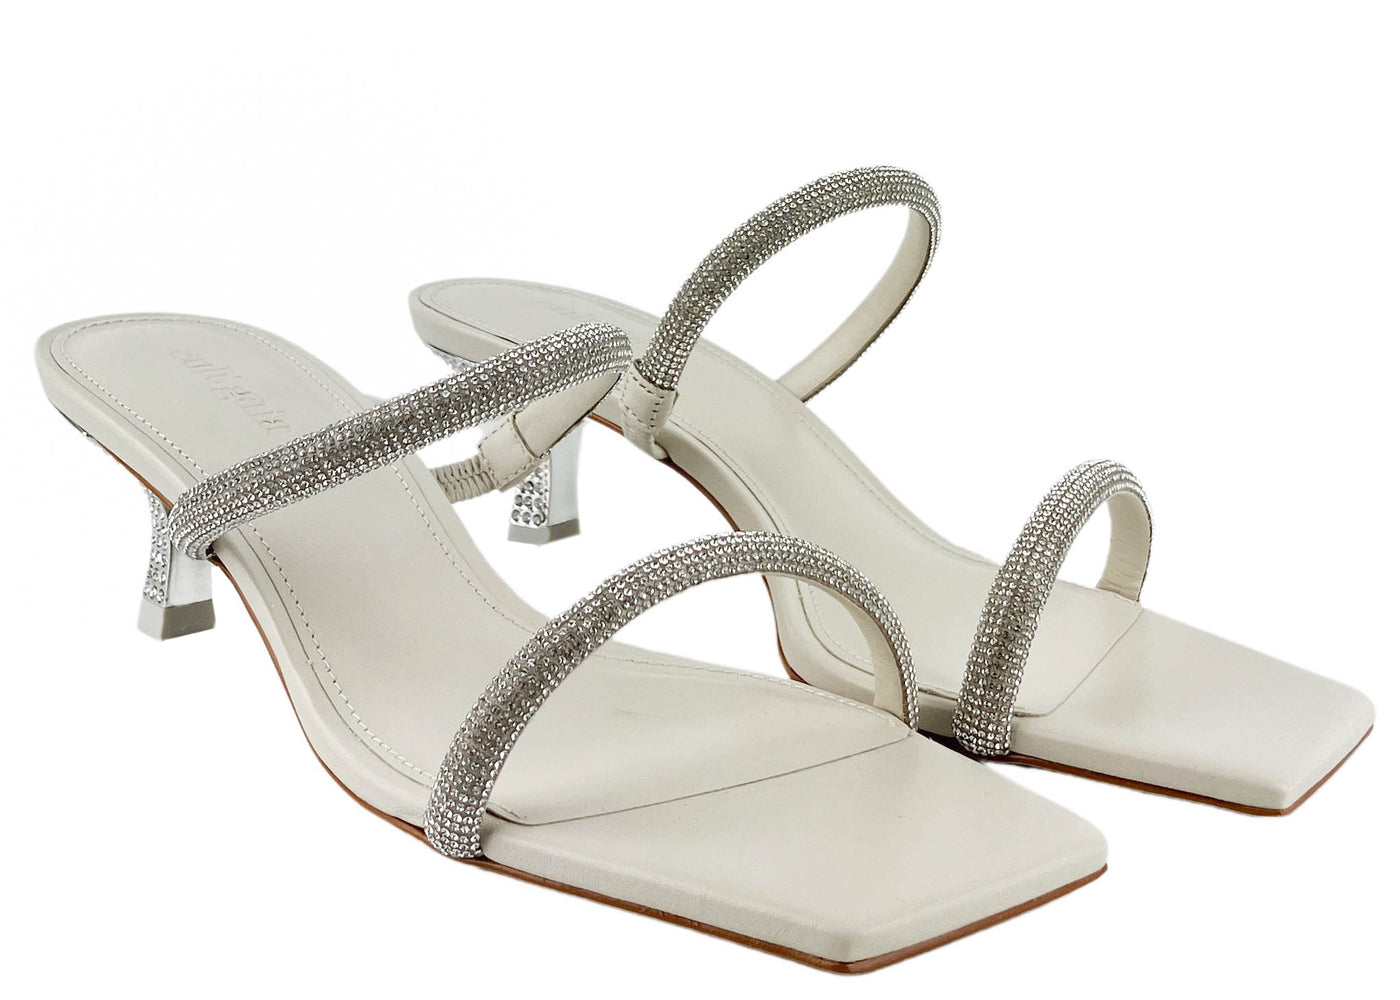 Cult Gaia Nami Sandals in Off White - Discounts on Cult Gaia at UAL